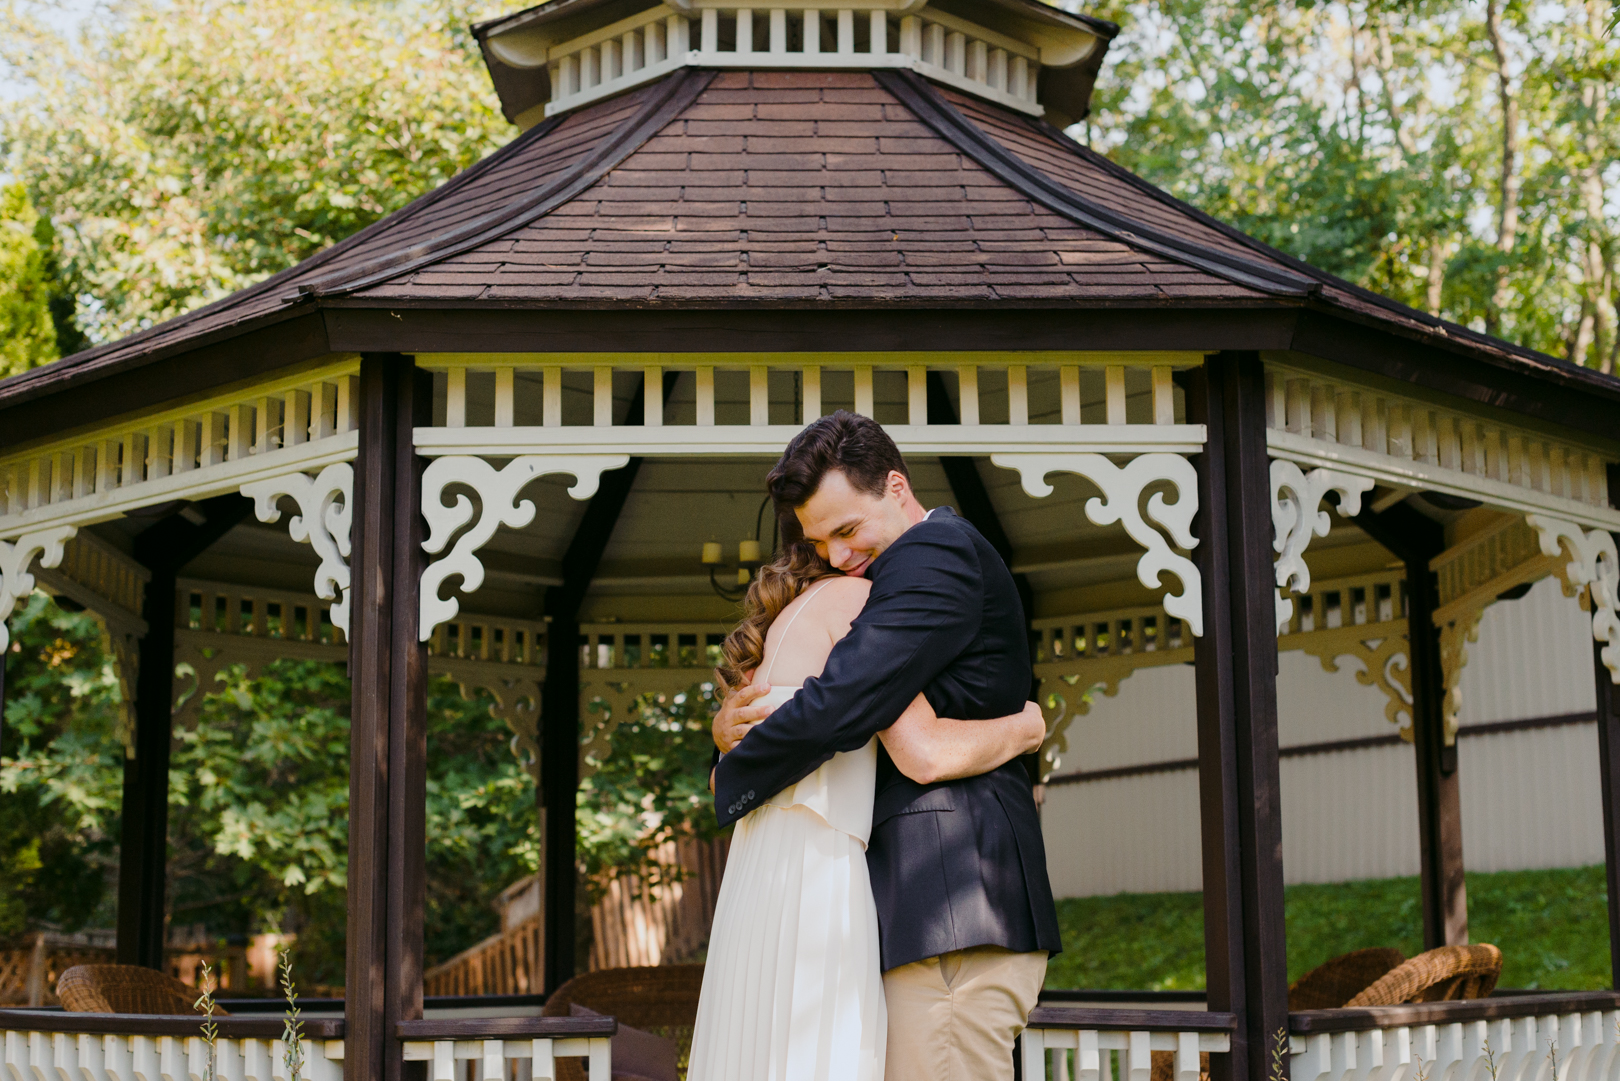 bride and groom hugging after wedding ceremony in front of pergola in backyard